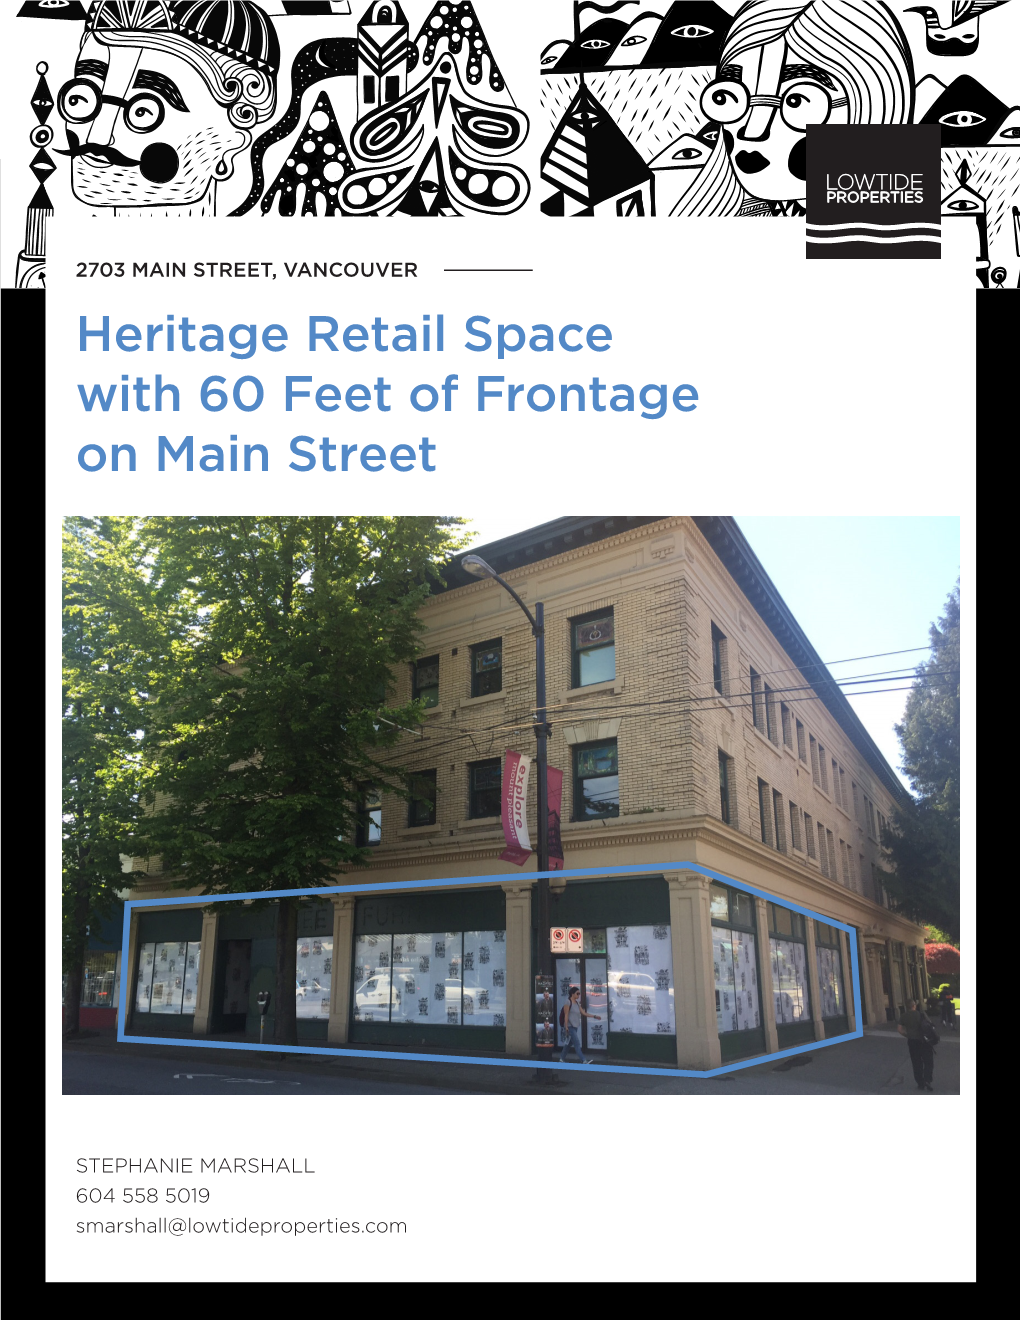 Heritage Retail Space with 60 Feet of Frontage on Main Street